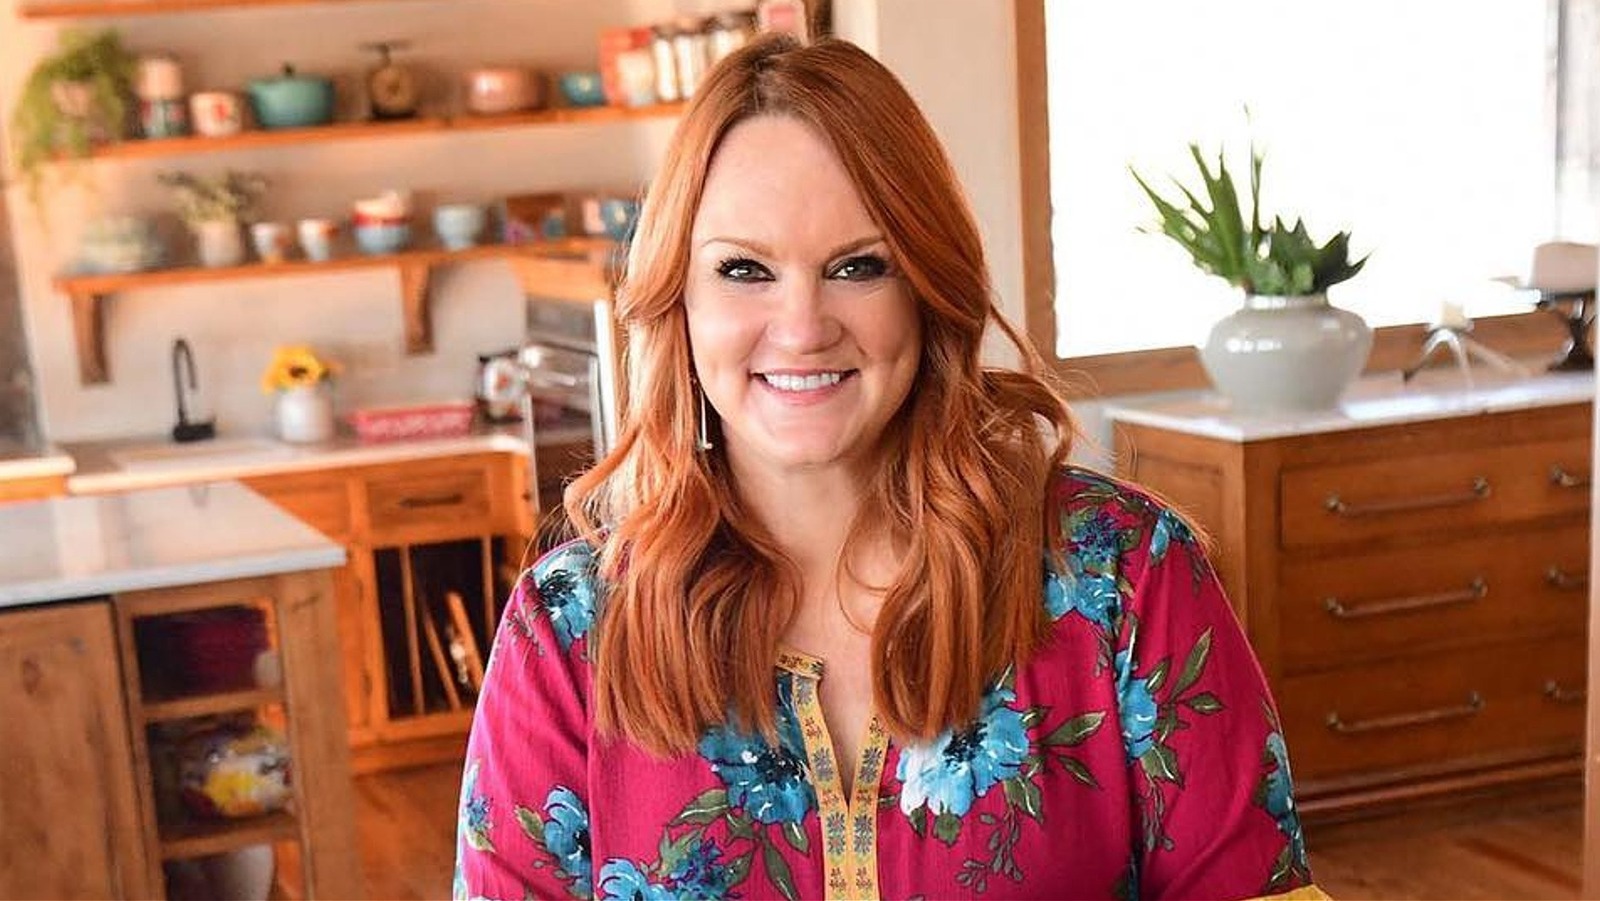 Ree Drummond’s Home Renovation Project Has The Tile Floors Of Our Dreams